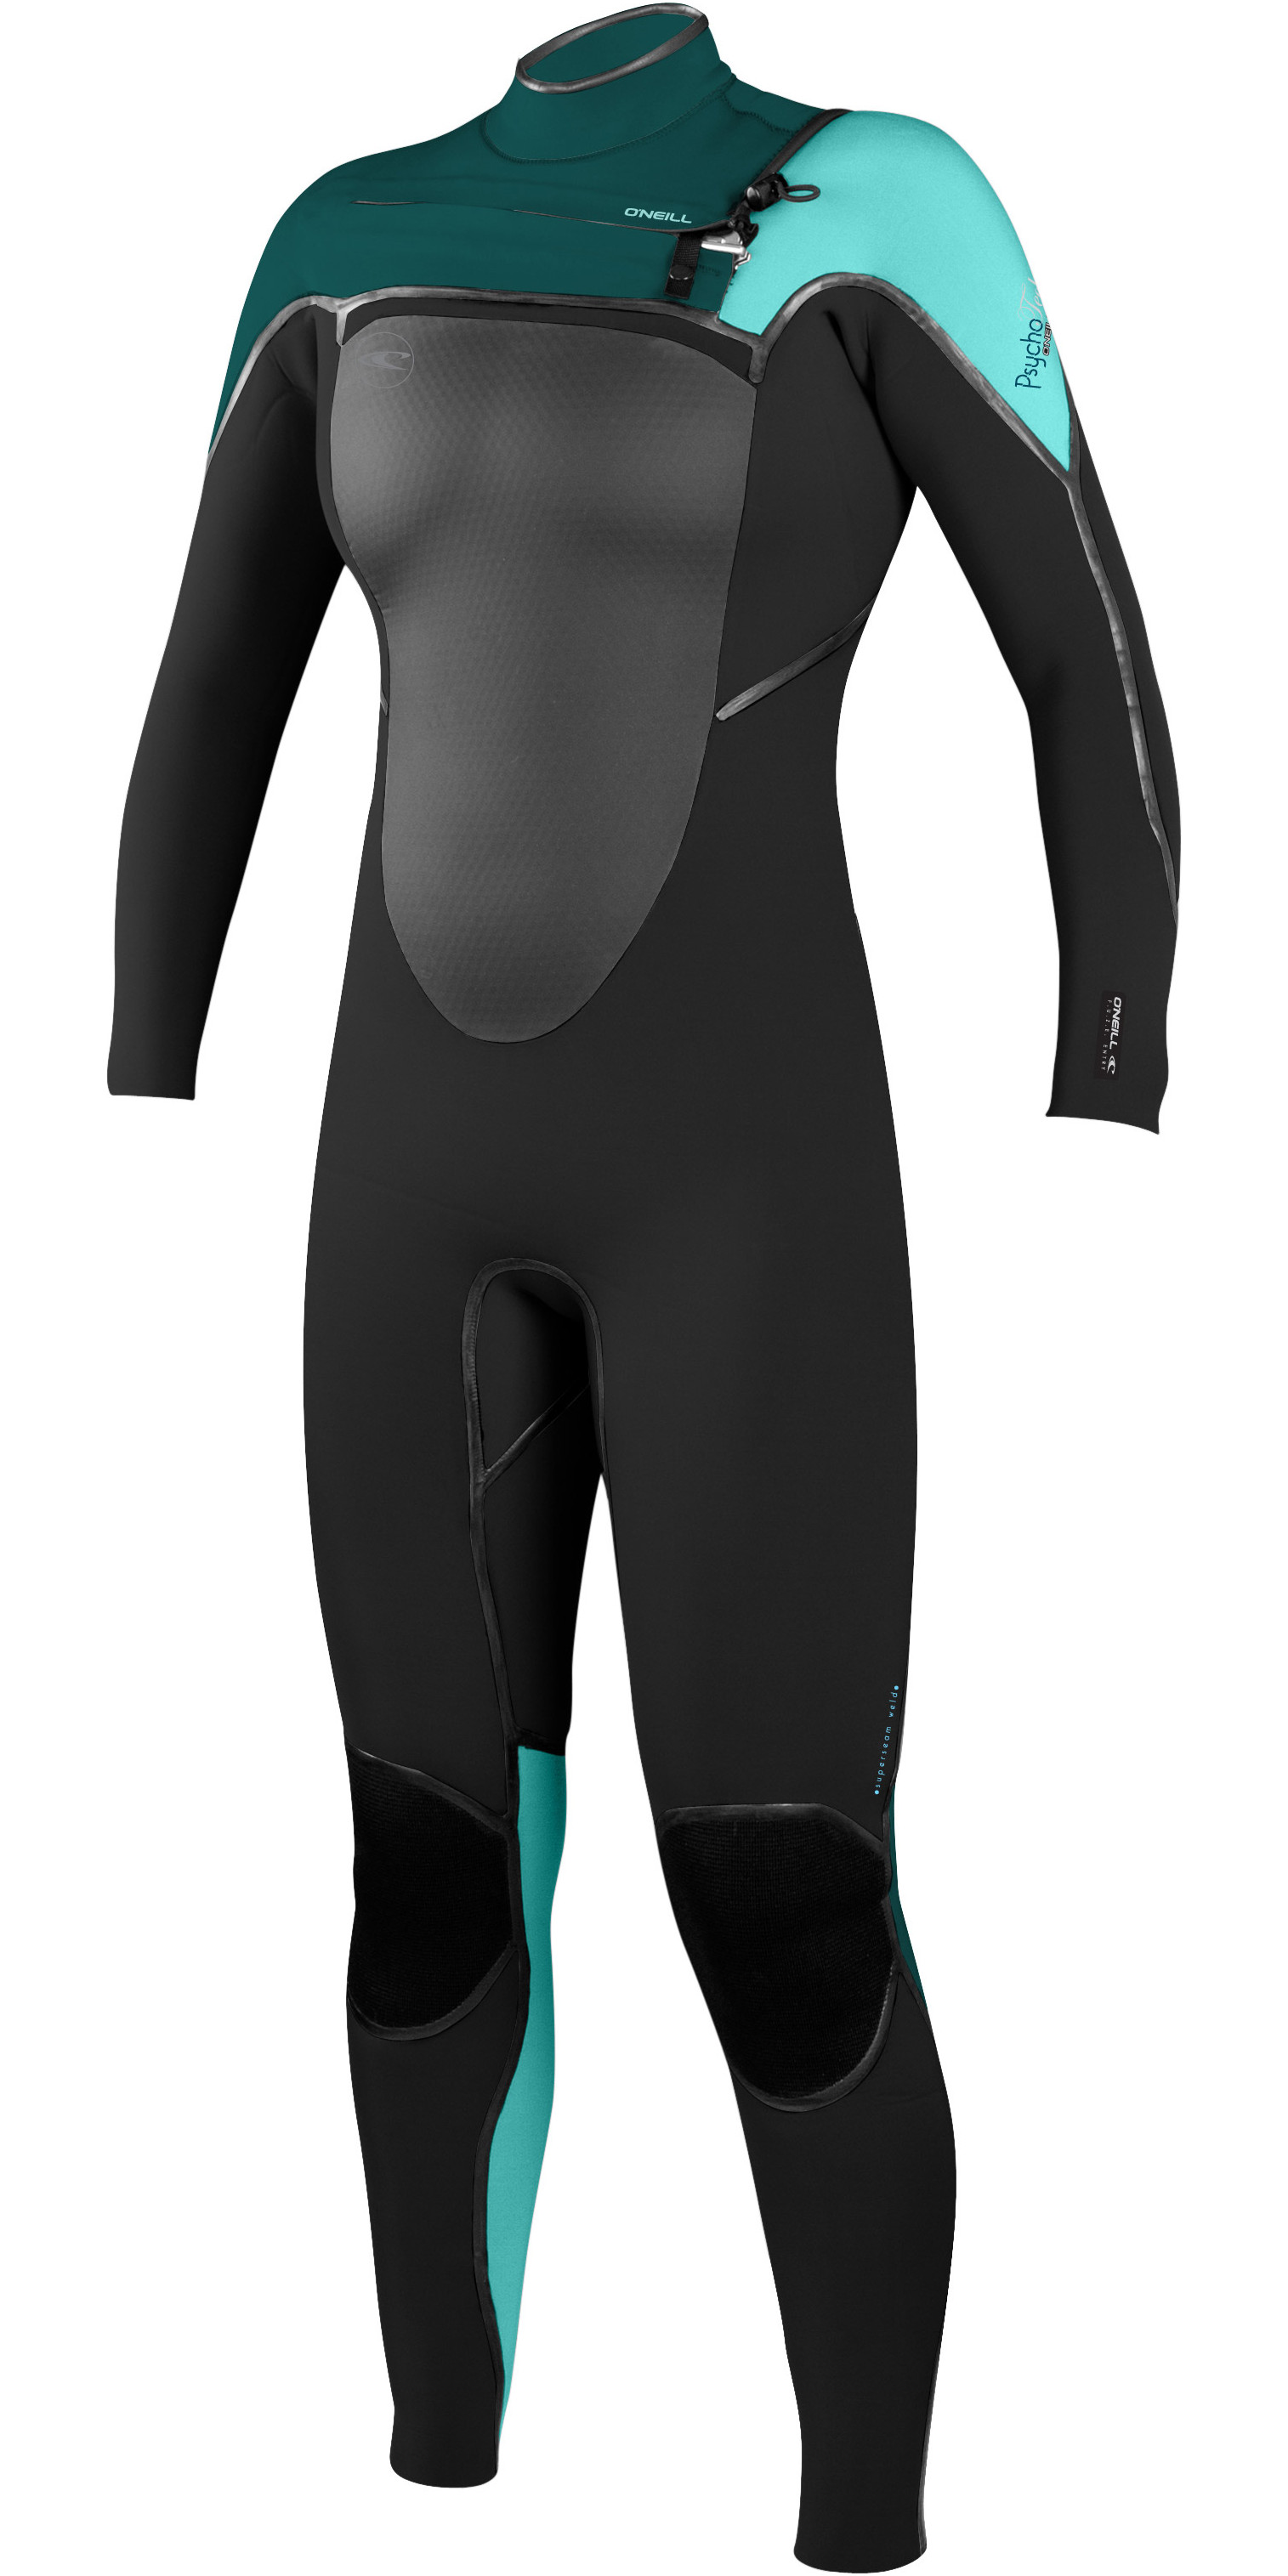 ONeill 2017 Ladies Psycho Tech 3/2mm Chest Zip Wetsuit BLACK/TEAL/SEAGLASS 4606